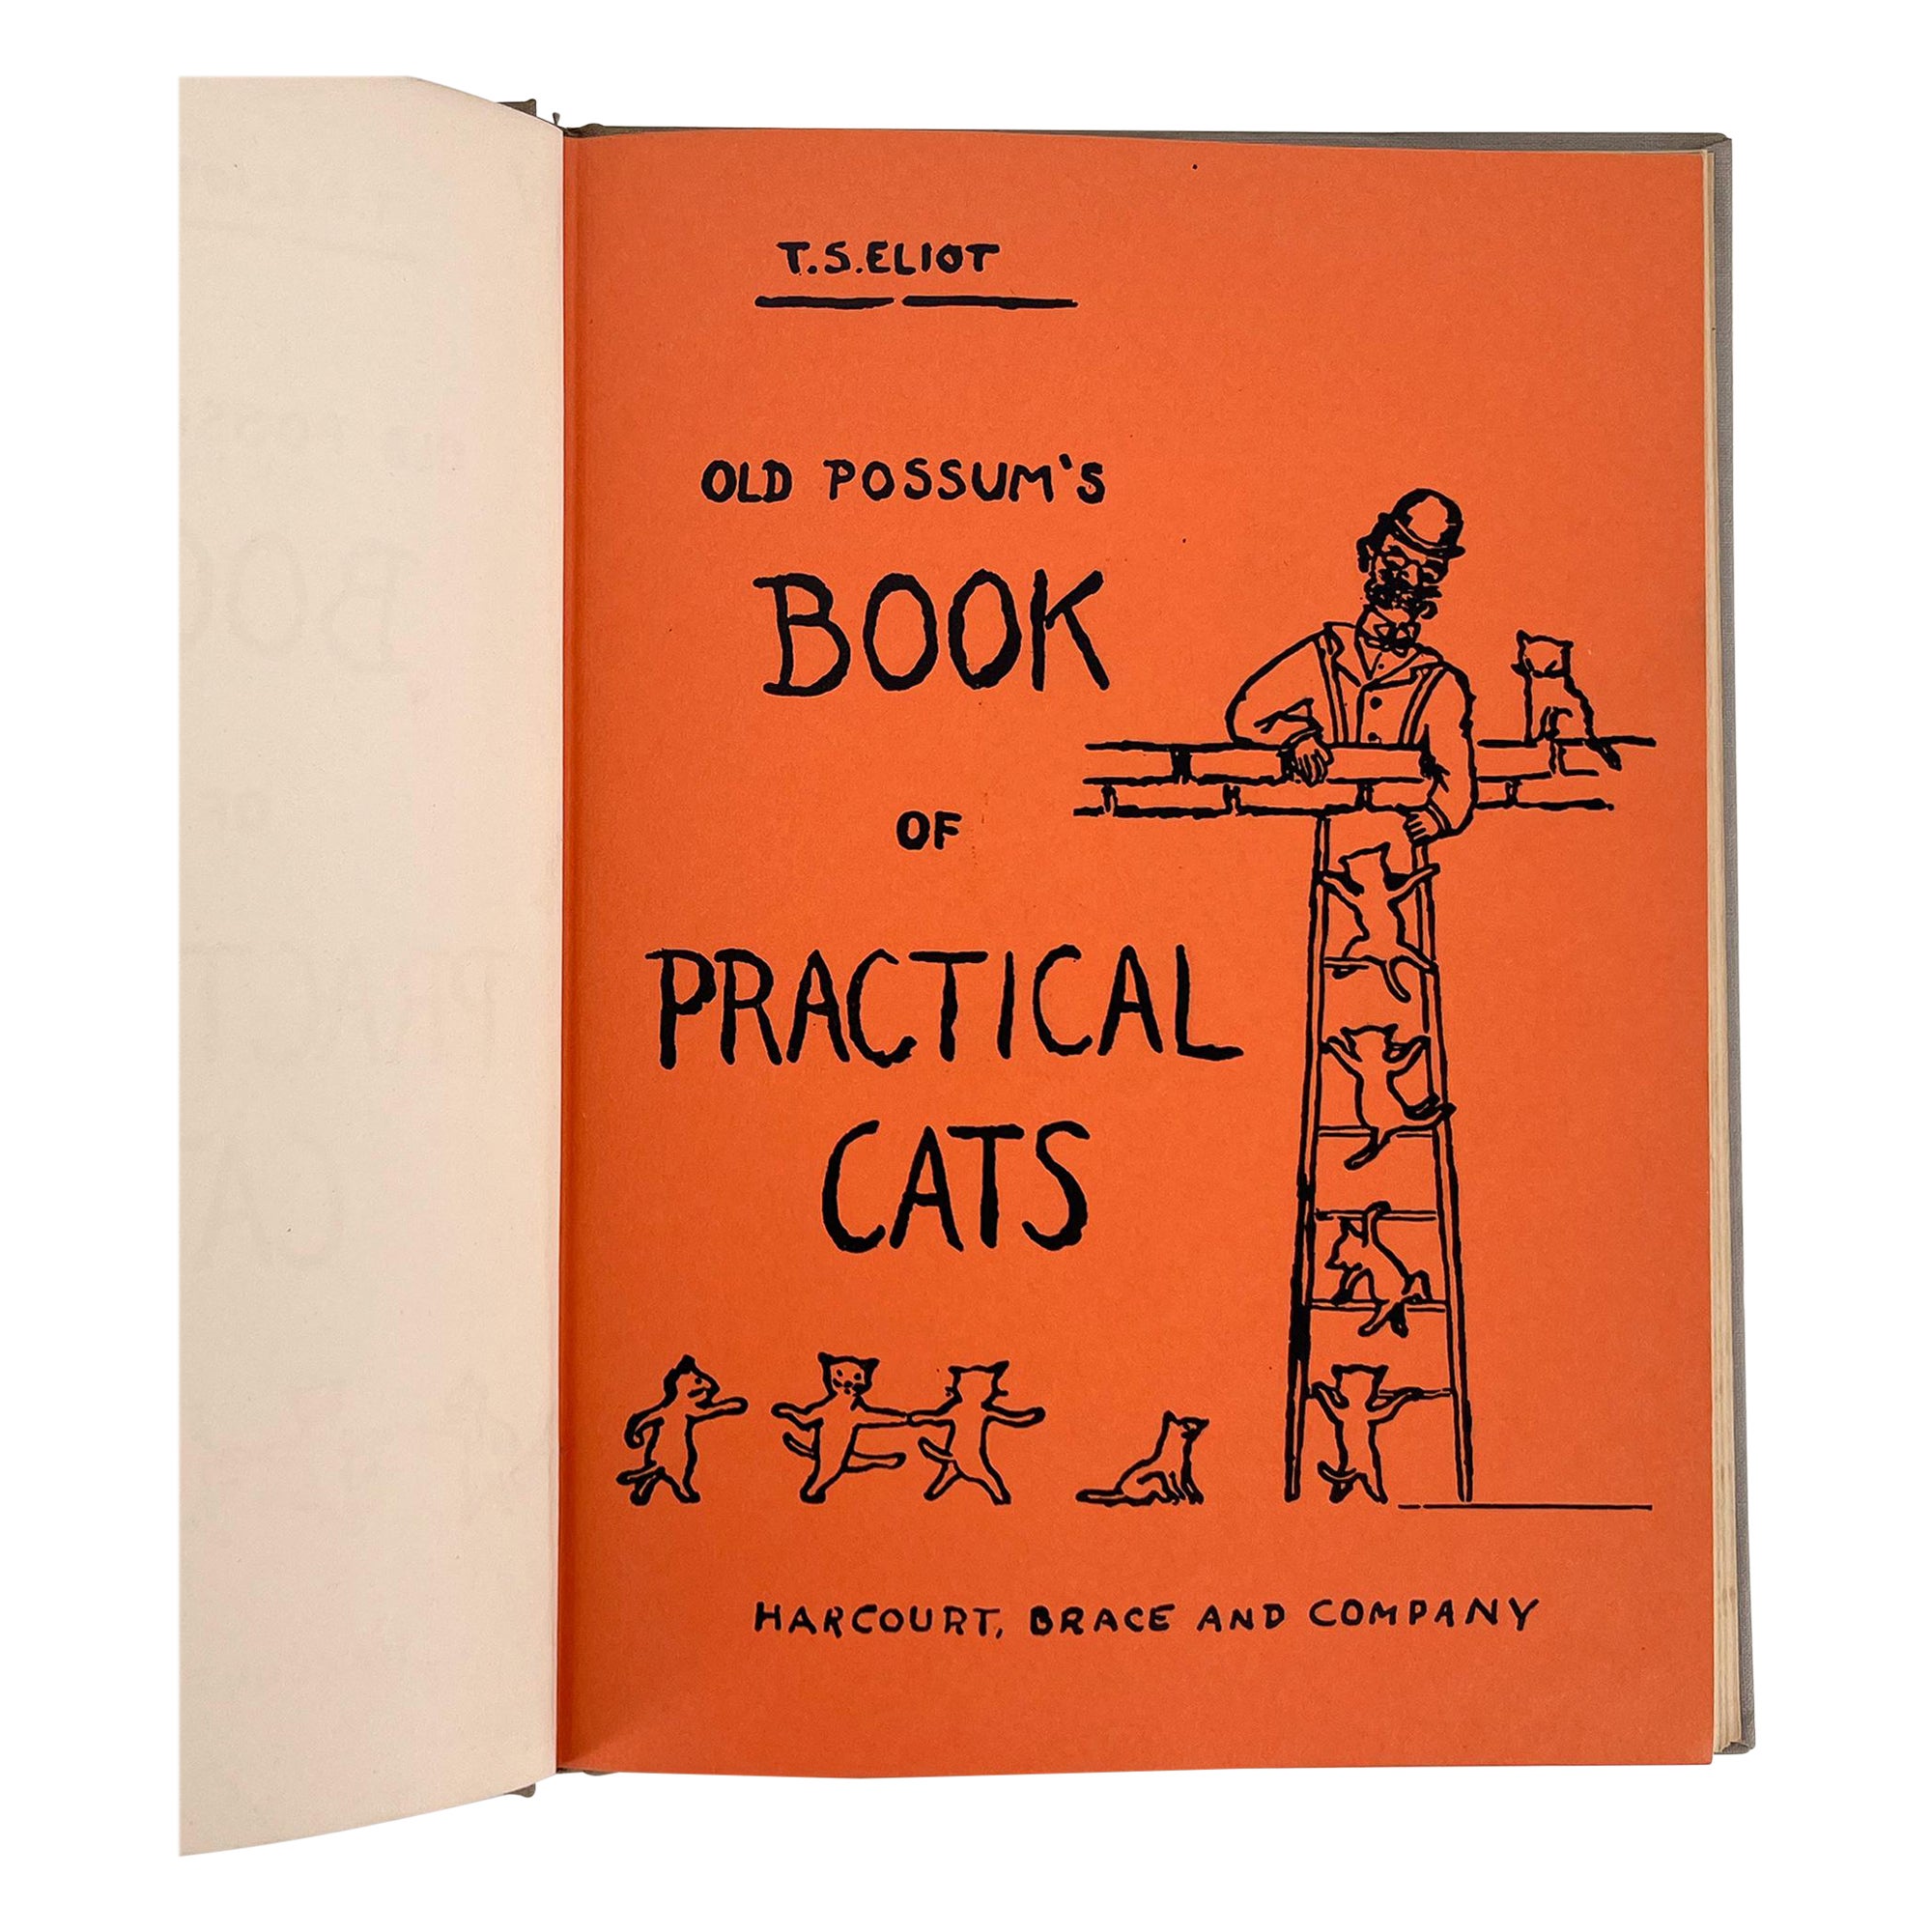 Old Possum's Book of Practical Cats by T. S. Eliot For Sale